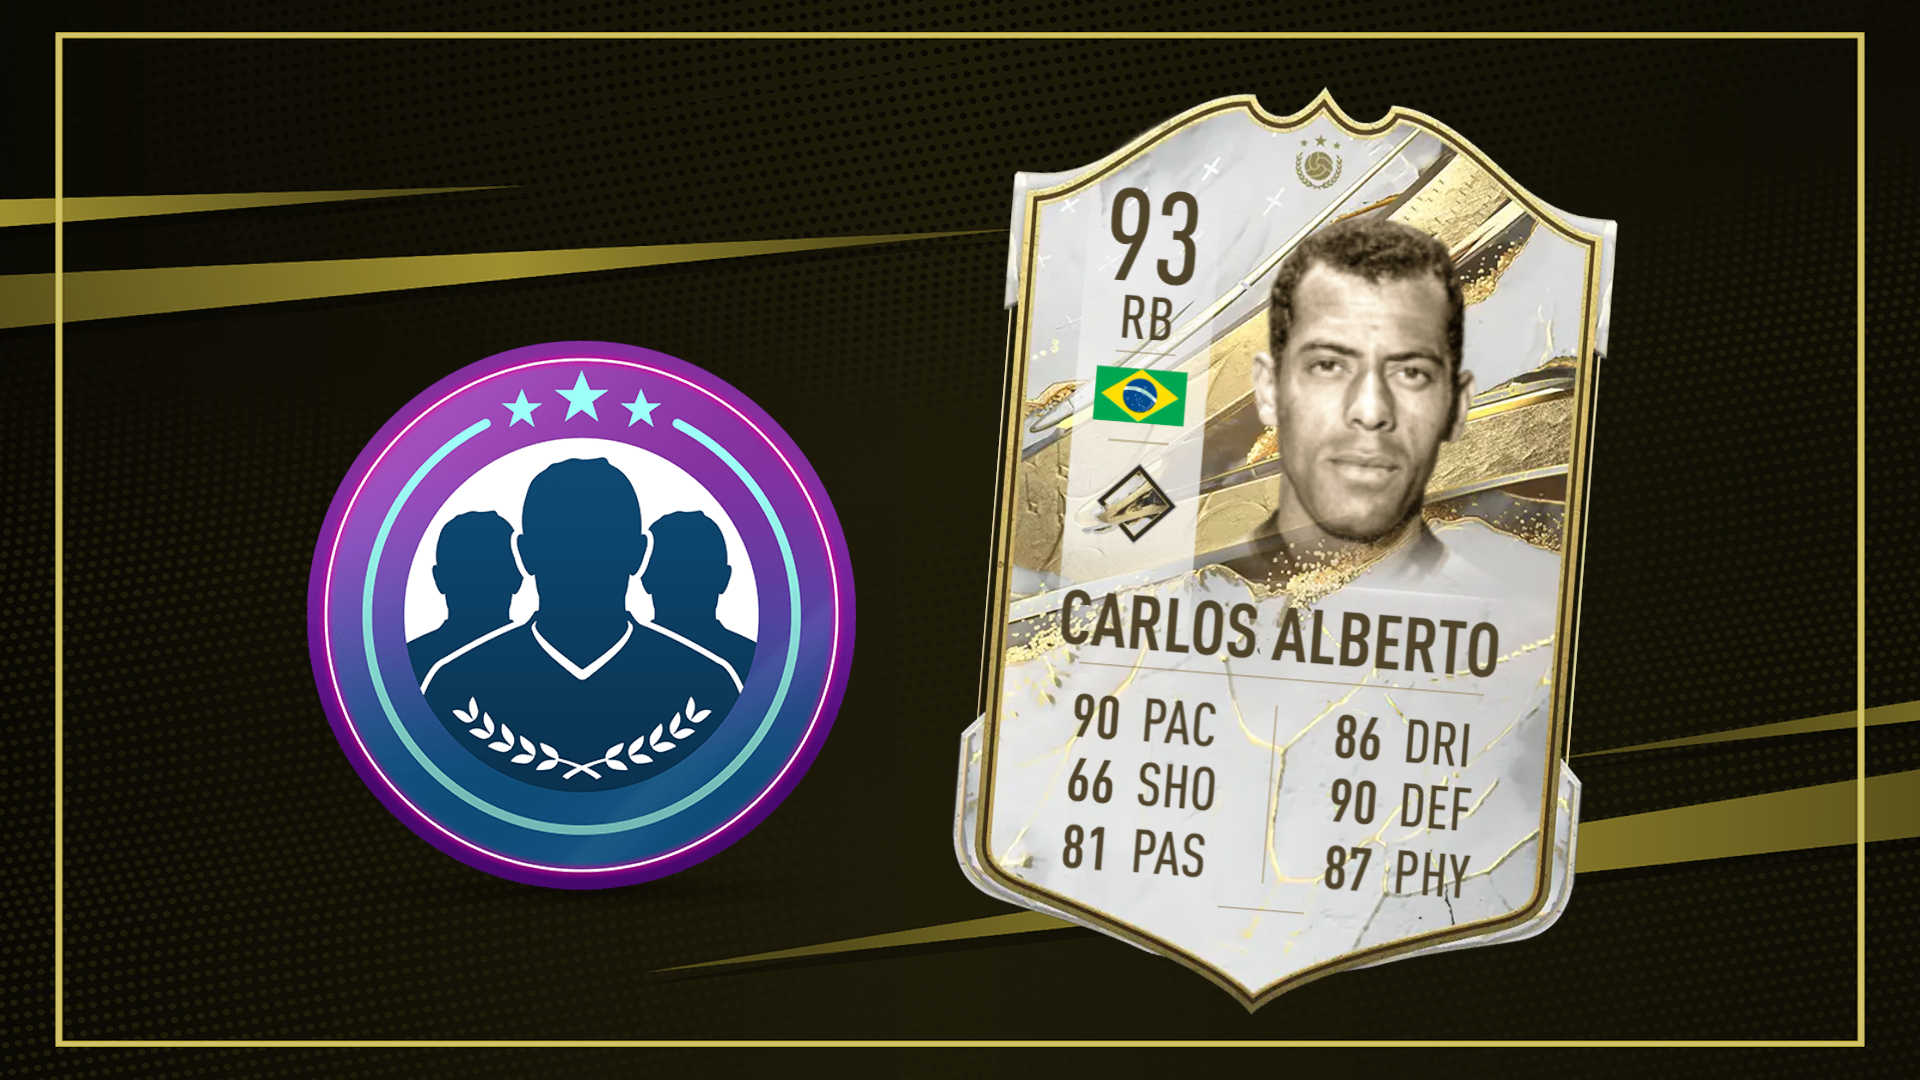 FIFA 23: Carlos Alberto Prime Icon is available via SBC (and can play central)